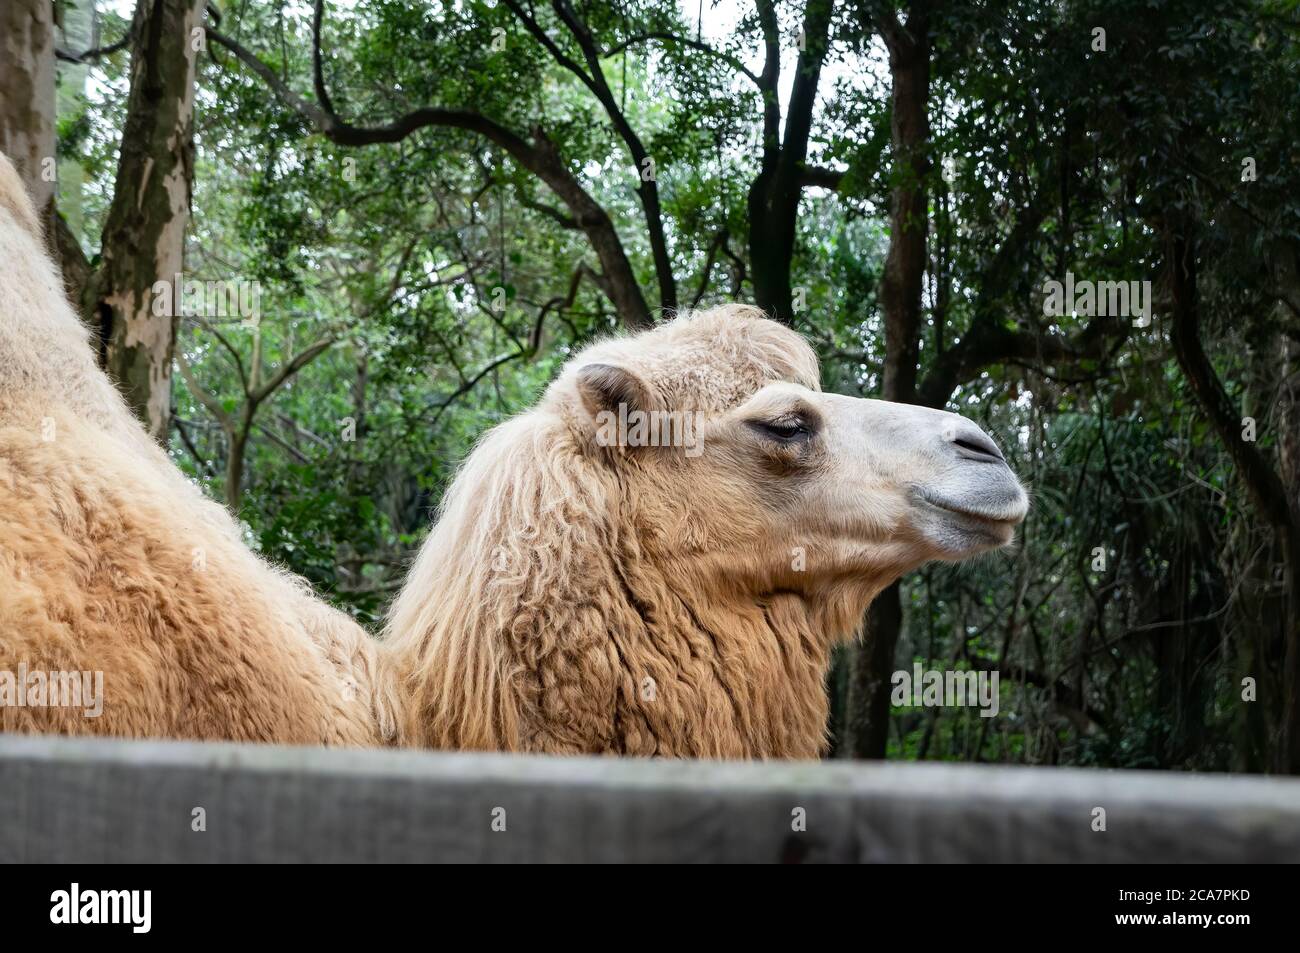 Bactrian Camel (Camelus bactrianus - large, even-toed ungulate native to the steppes of Central Asia and the largest living camel) in Zoo Safari park Stock Photo